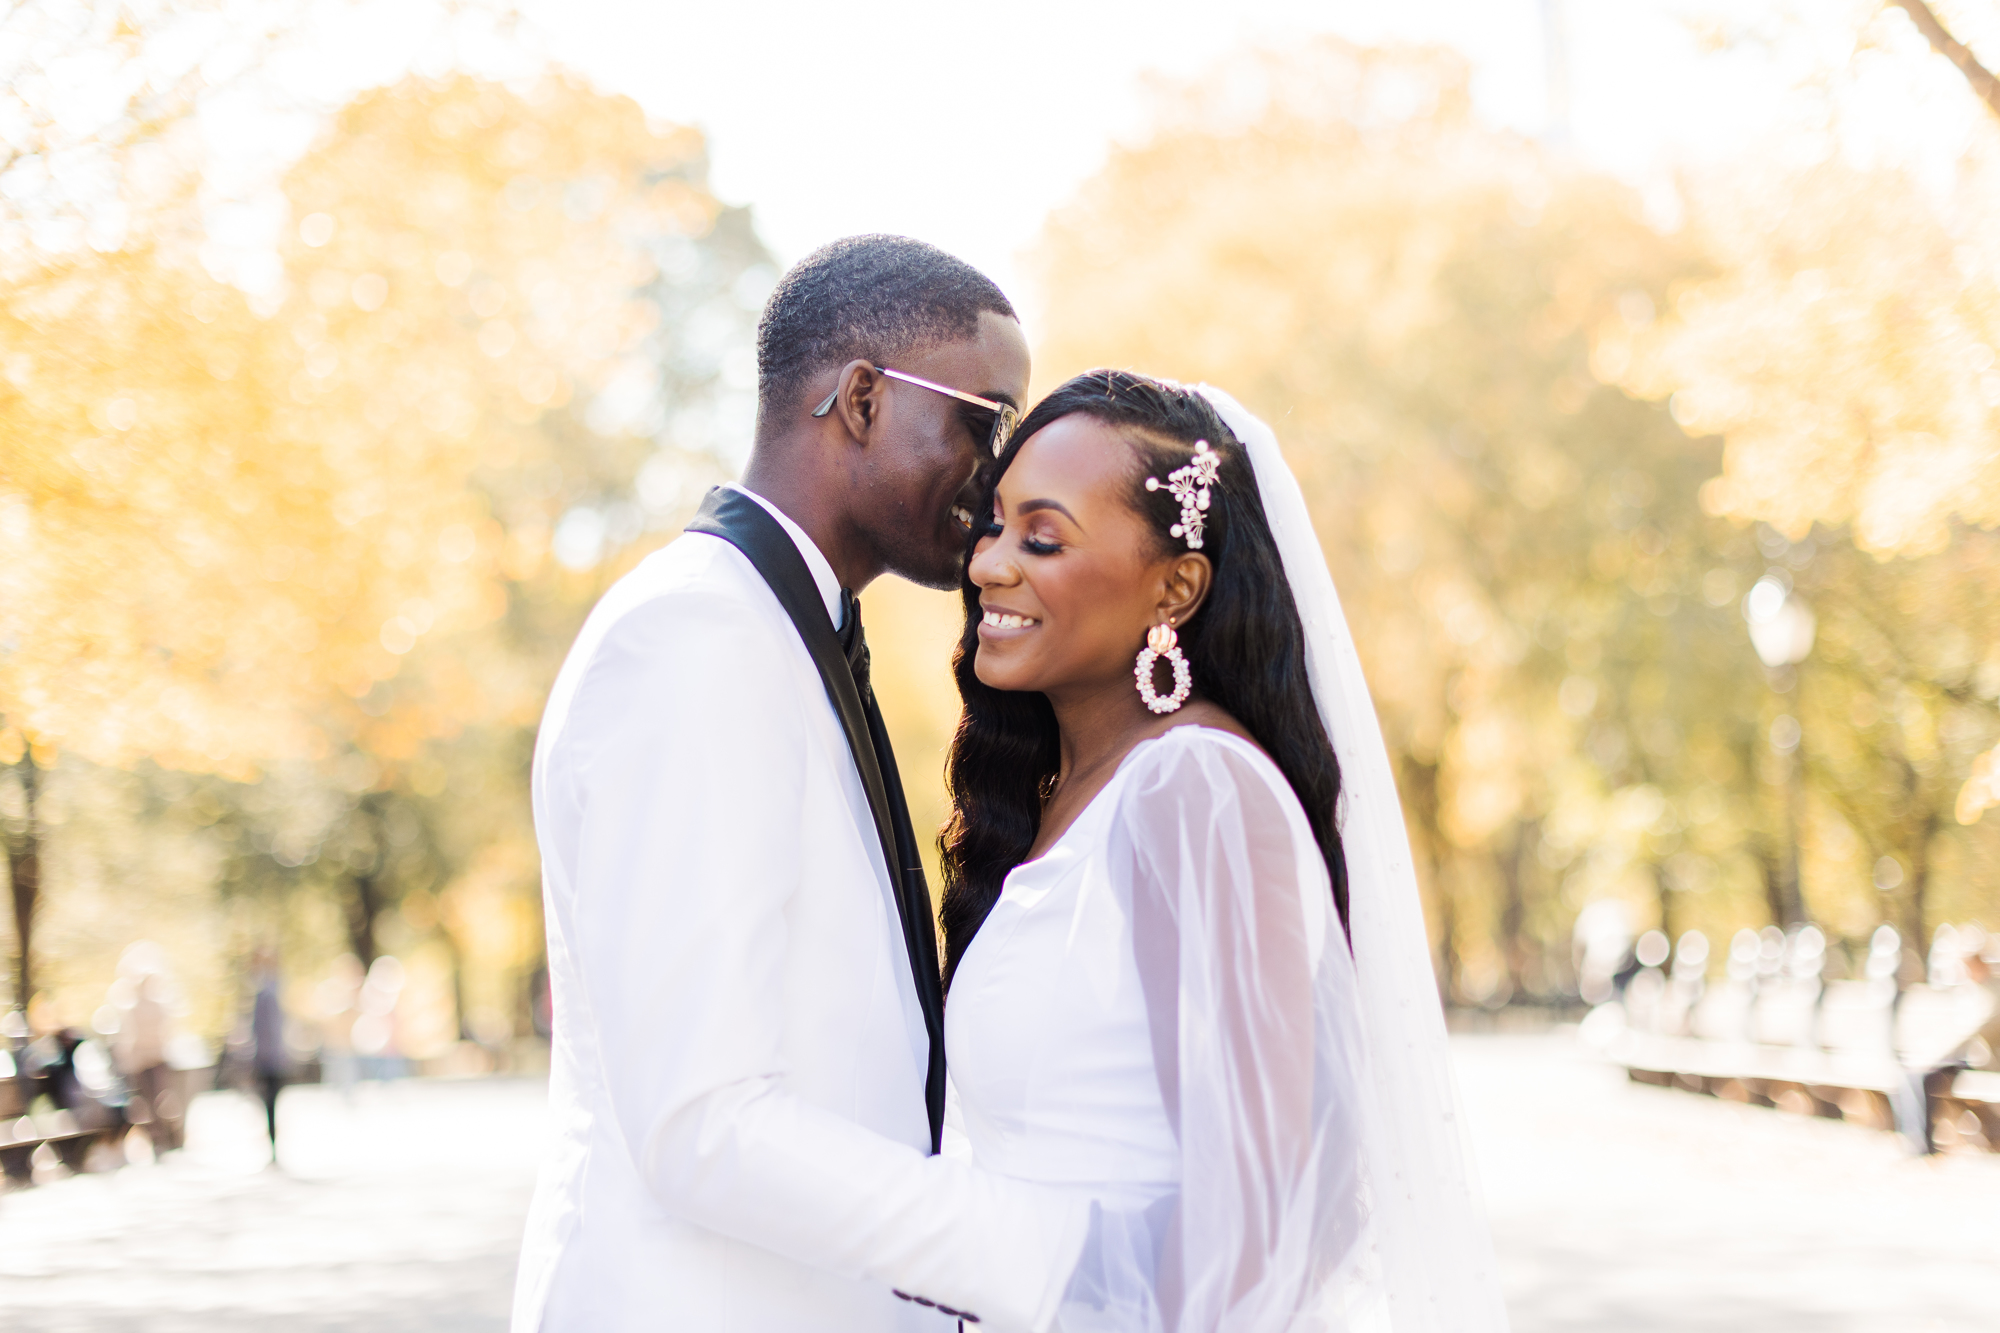 Fabulous Central Park Wedding Photos on Cherry Hill in Fall